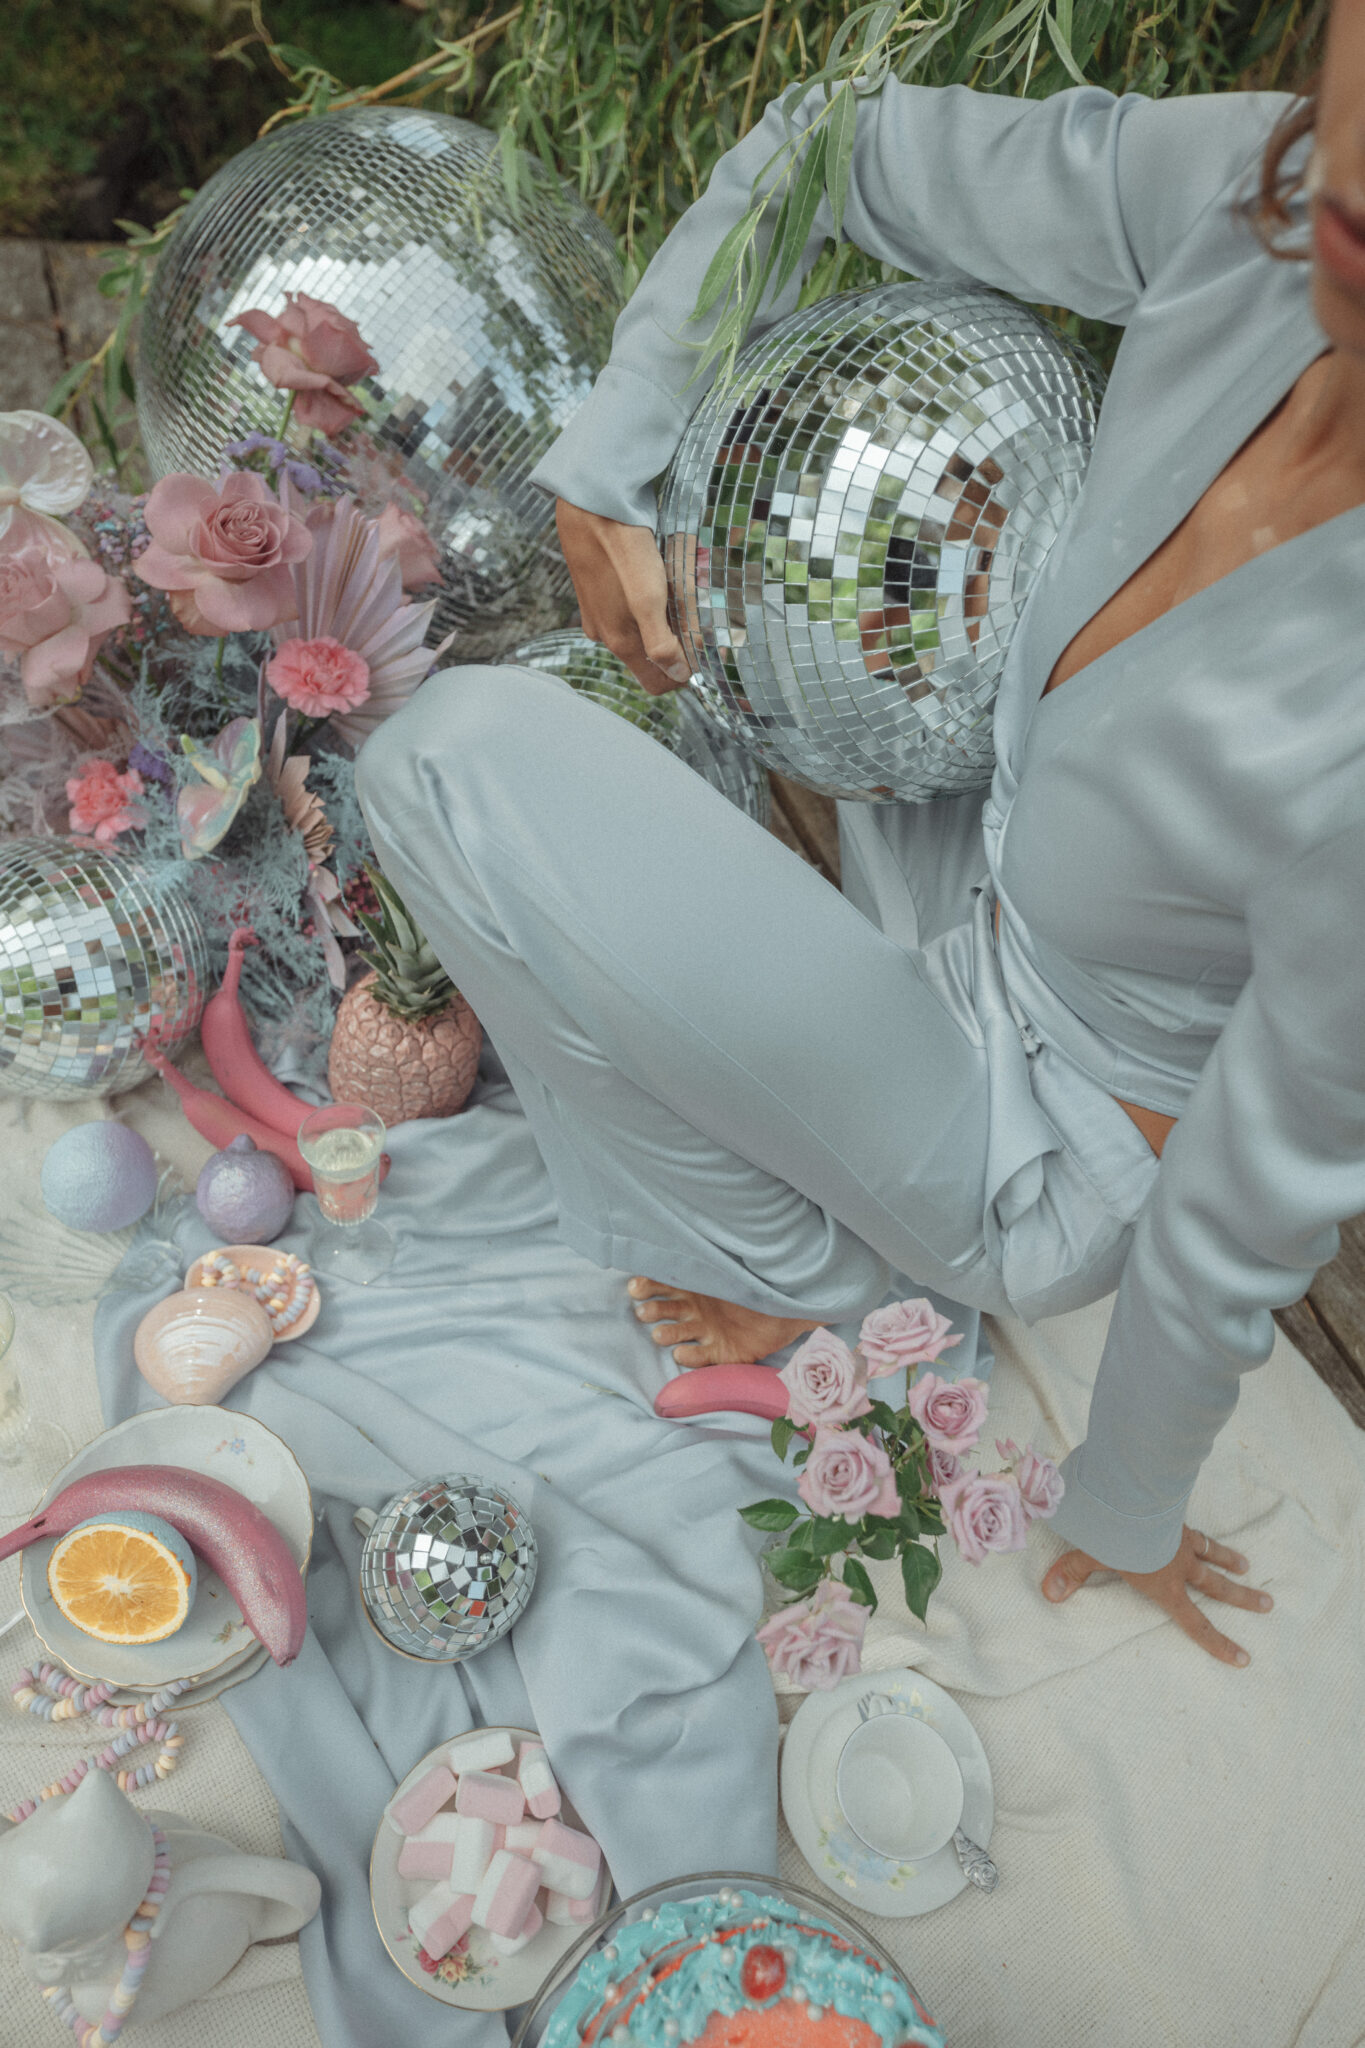 surrealistic picnic with girl in loungewear